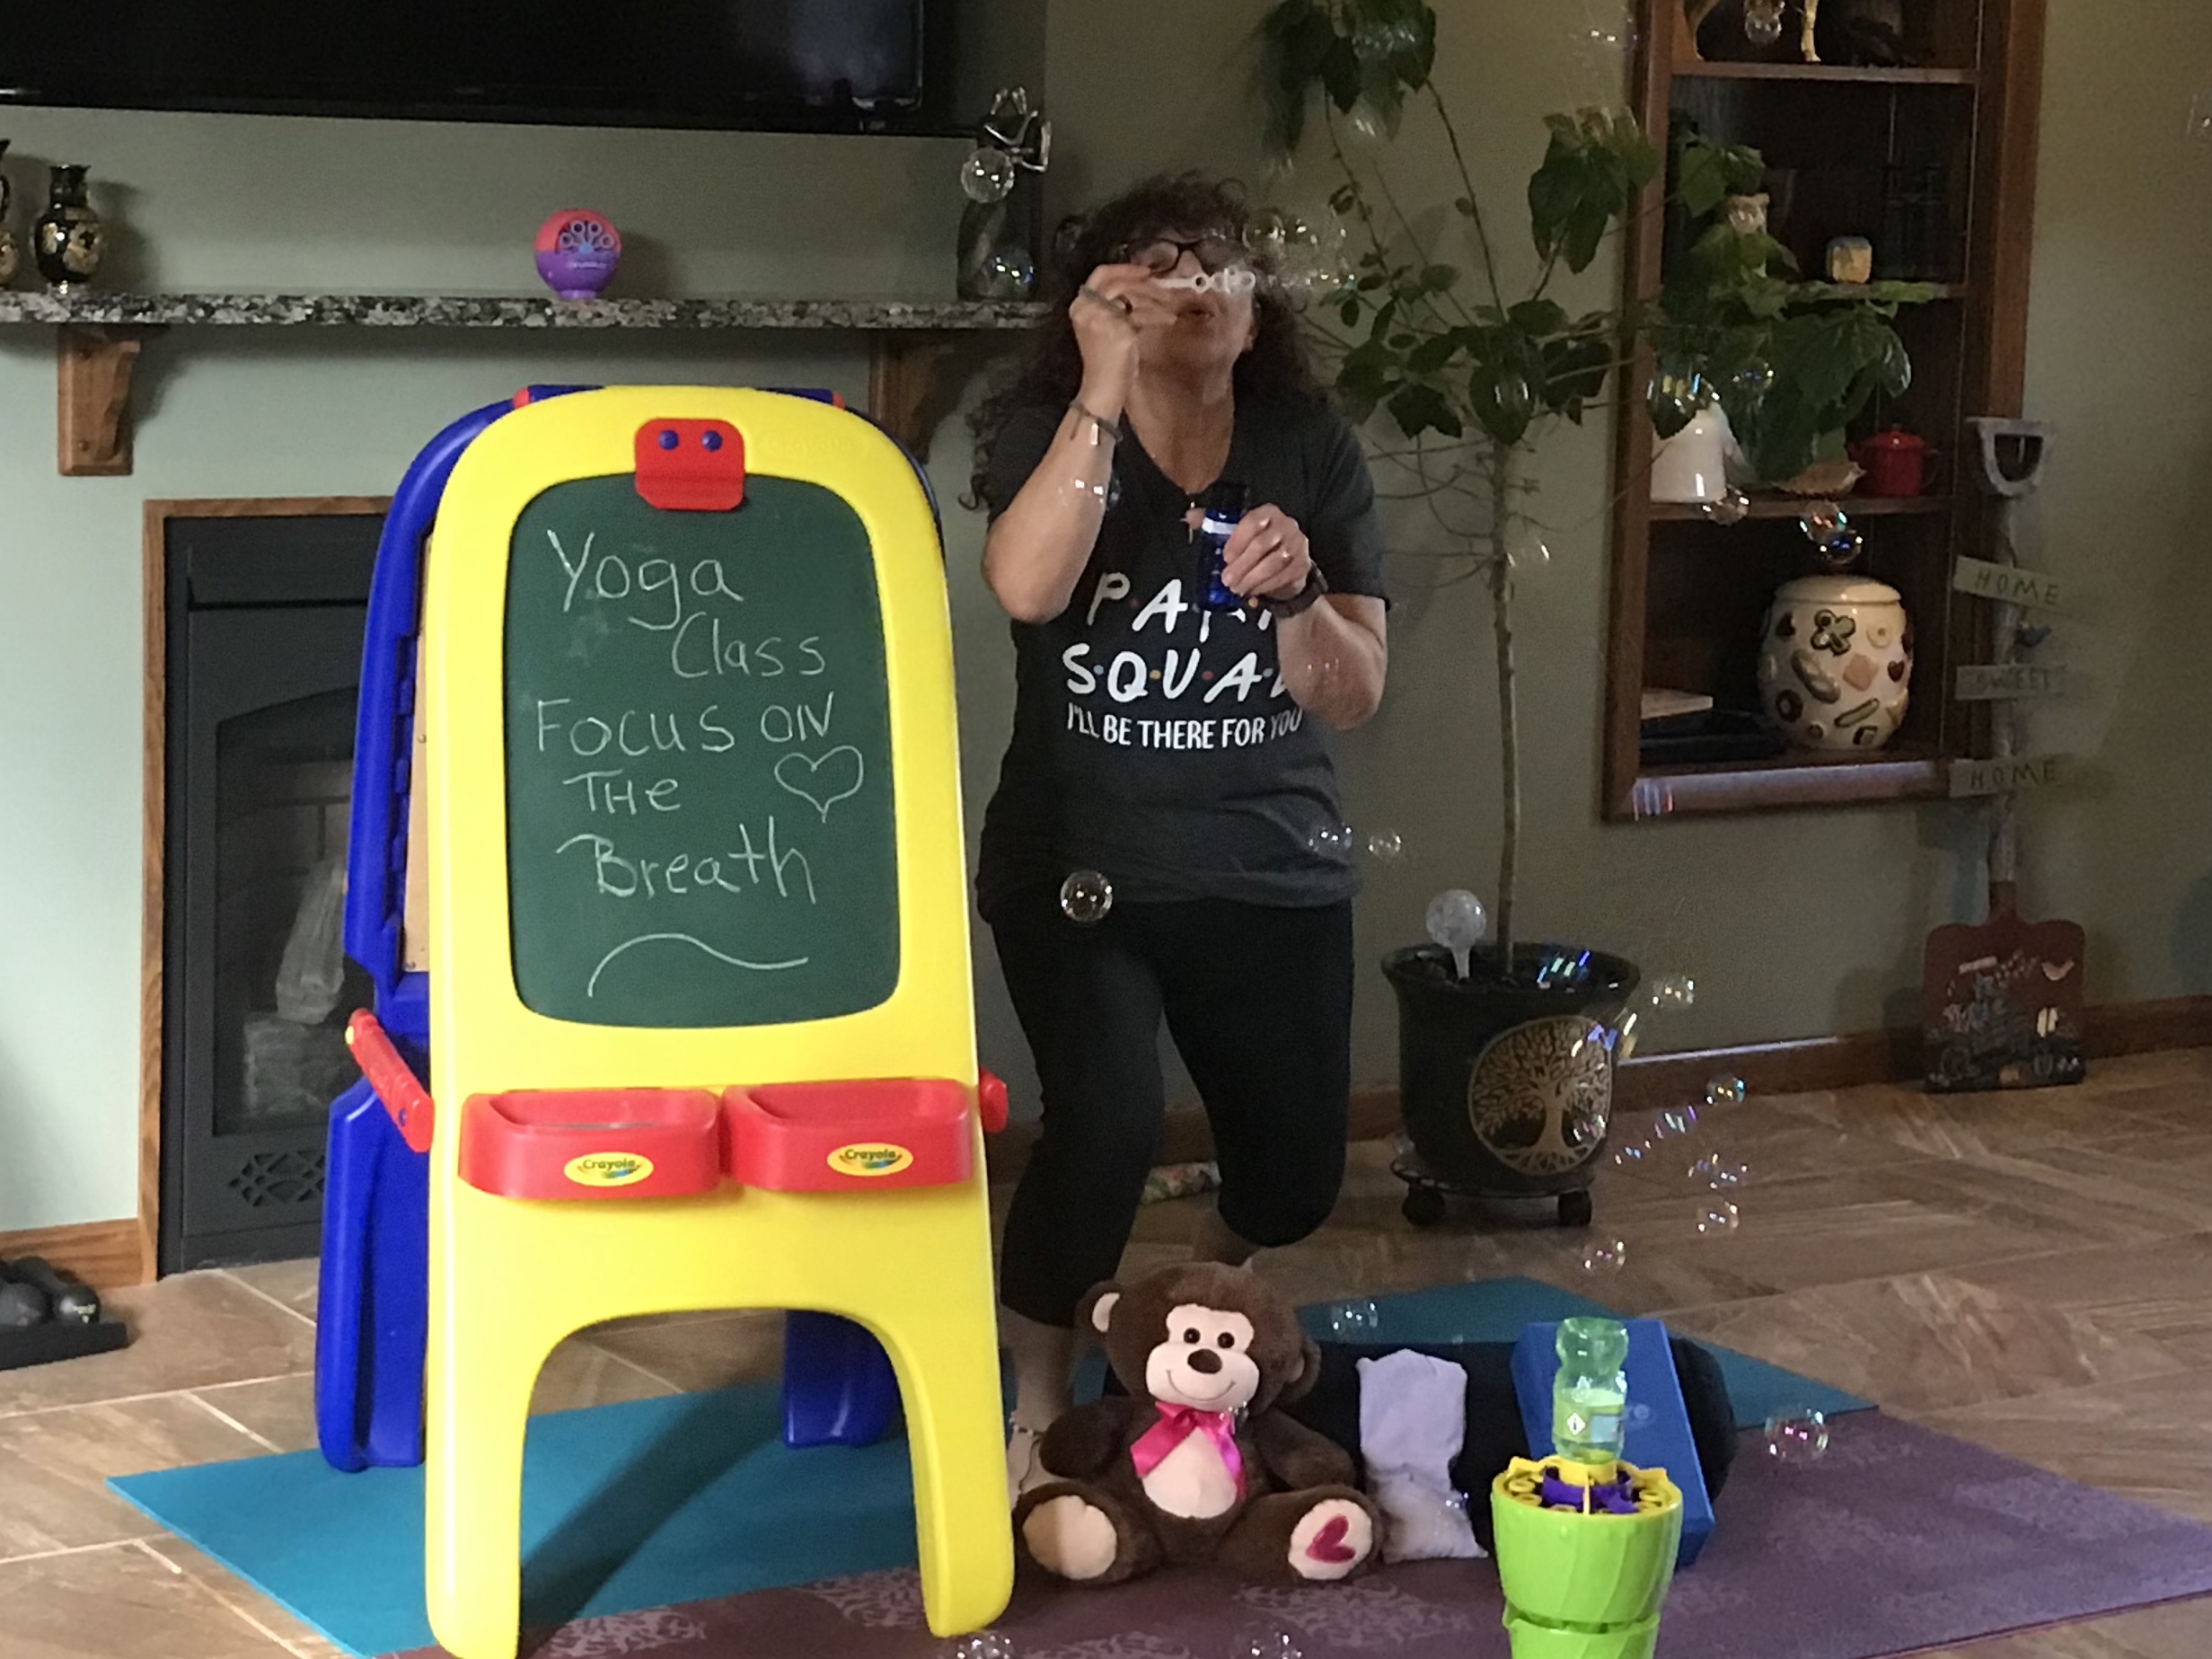 A dark-haired woman standing by a child's chalkboard, blowing bubbles